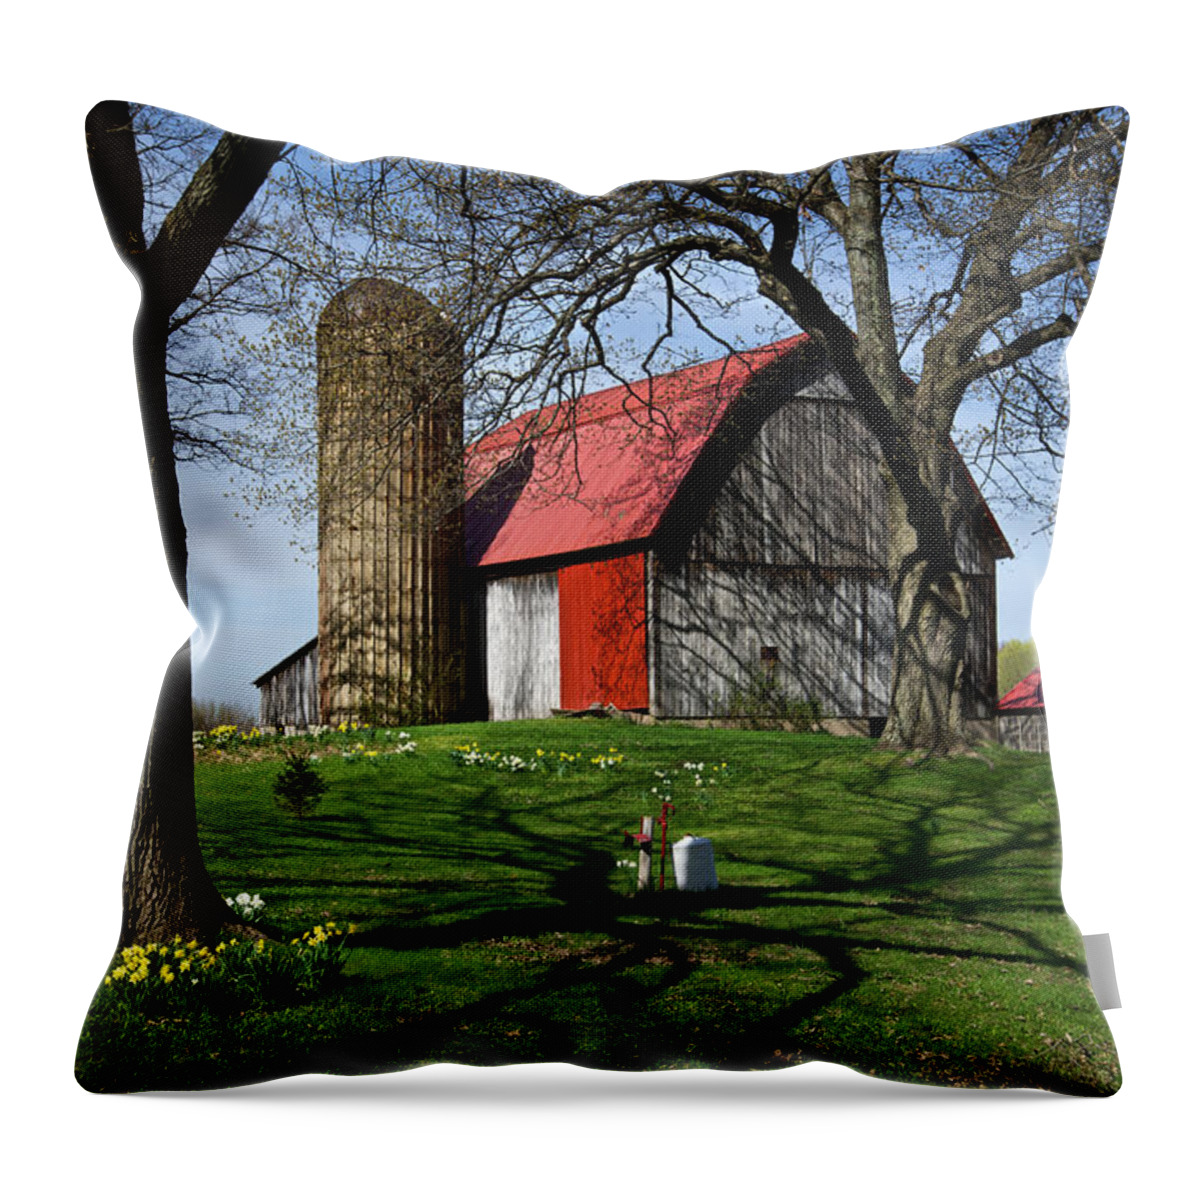 Barn Throw Pillow featuring the photograph Barn with Silo in Springtime by Mary Lee Dereske